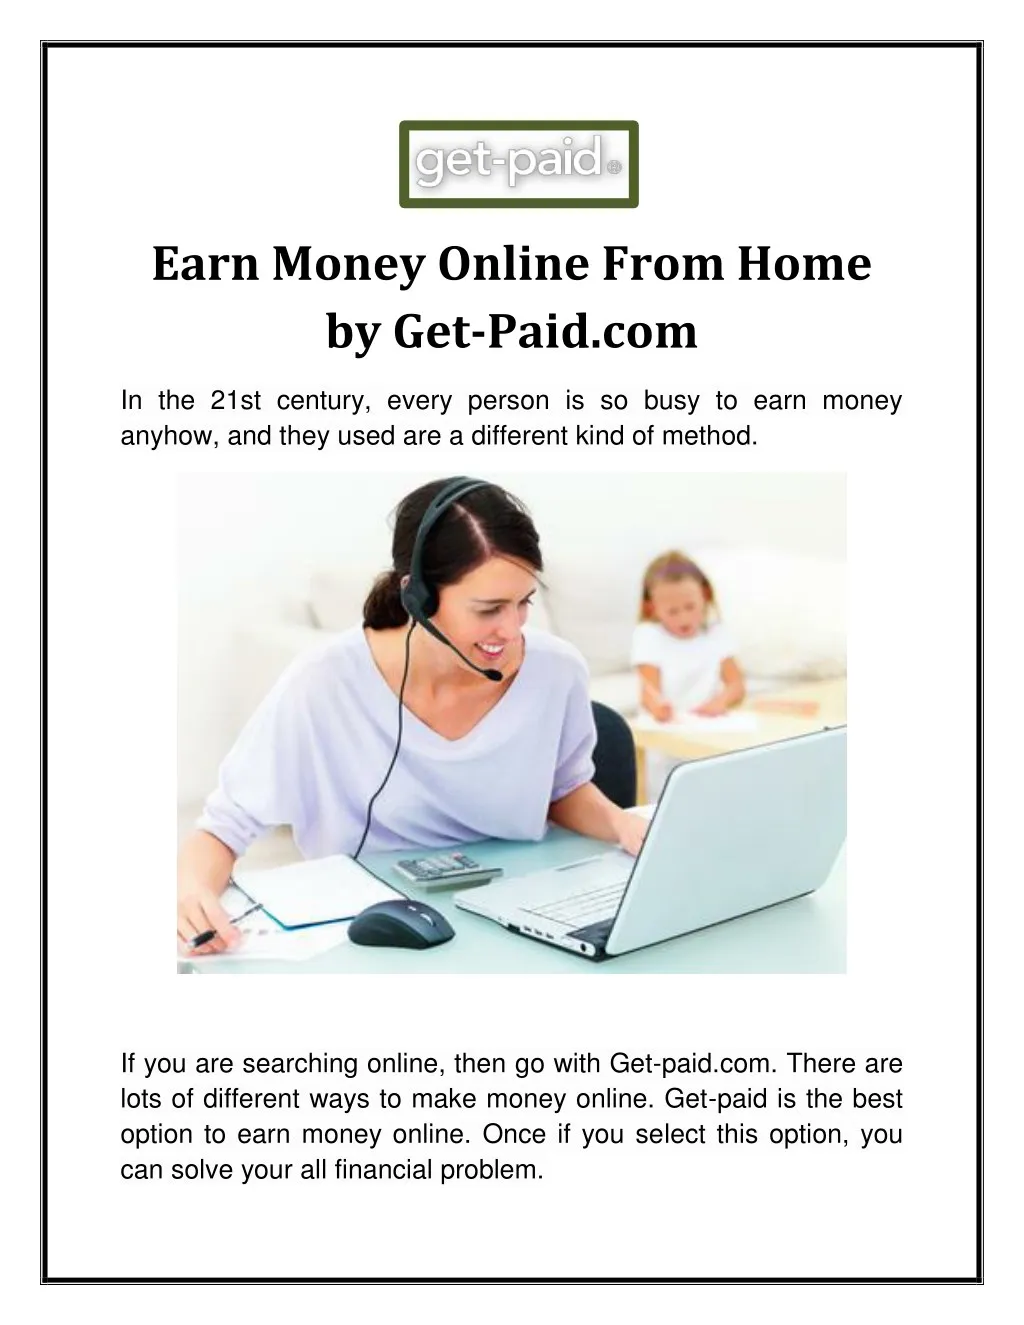 earn money online from home by get paid com